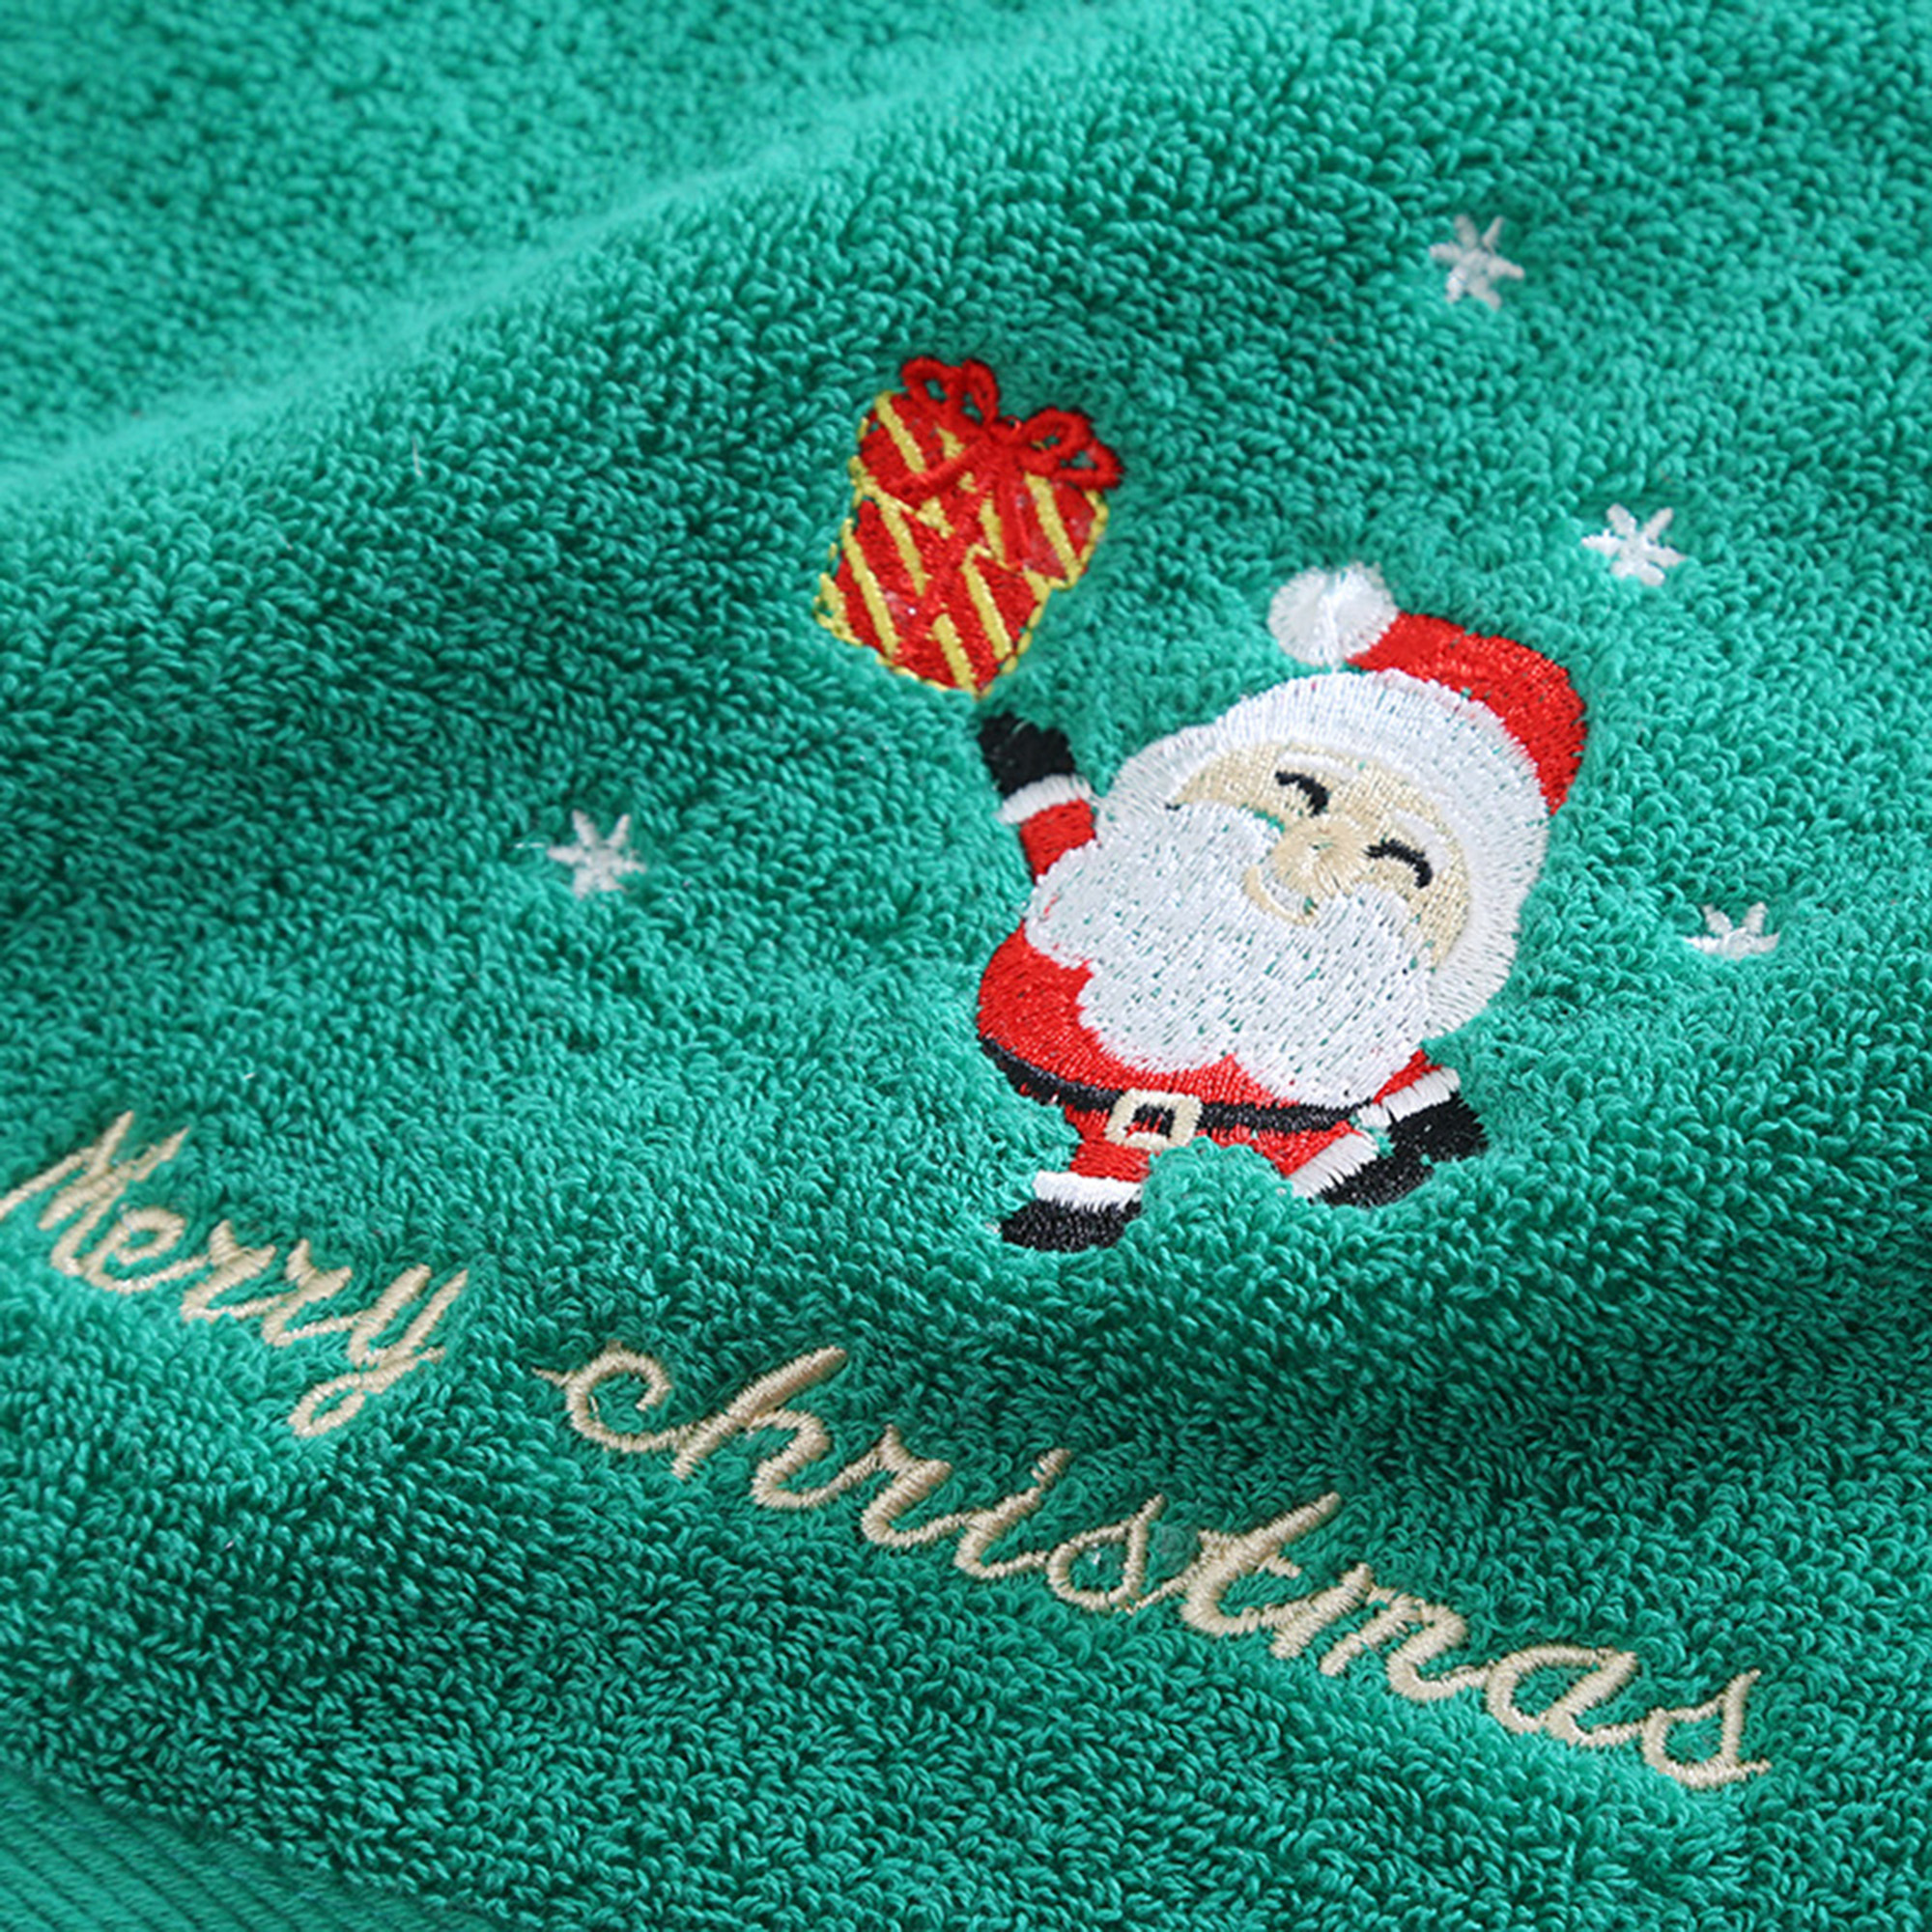 Christmas Hand Towels 4pcs Hand Dry Towel with Hanging Loop Cute